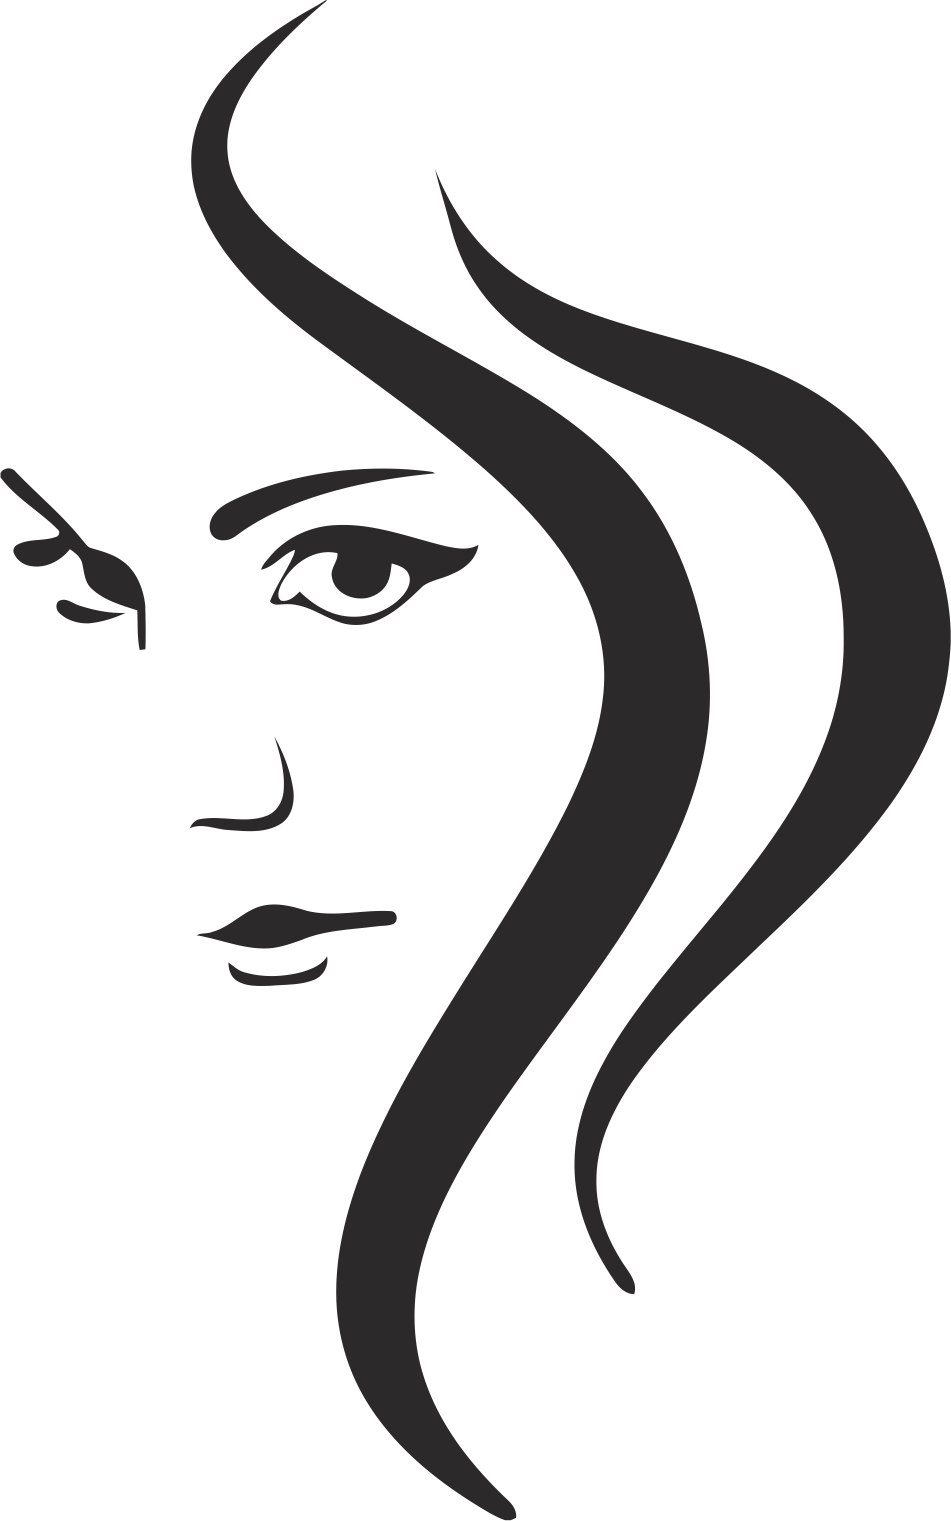 Woman Face Silhouette Free Vector : Free Vector Silhouette File Page 4